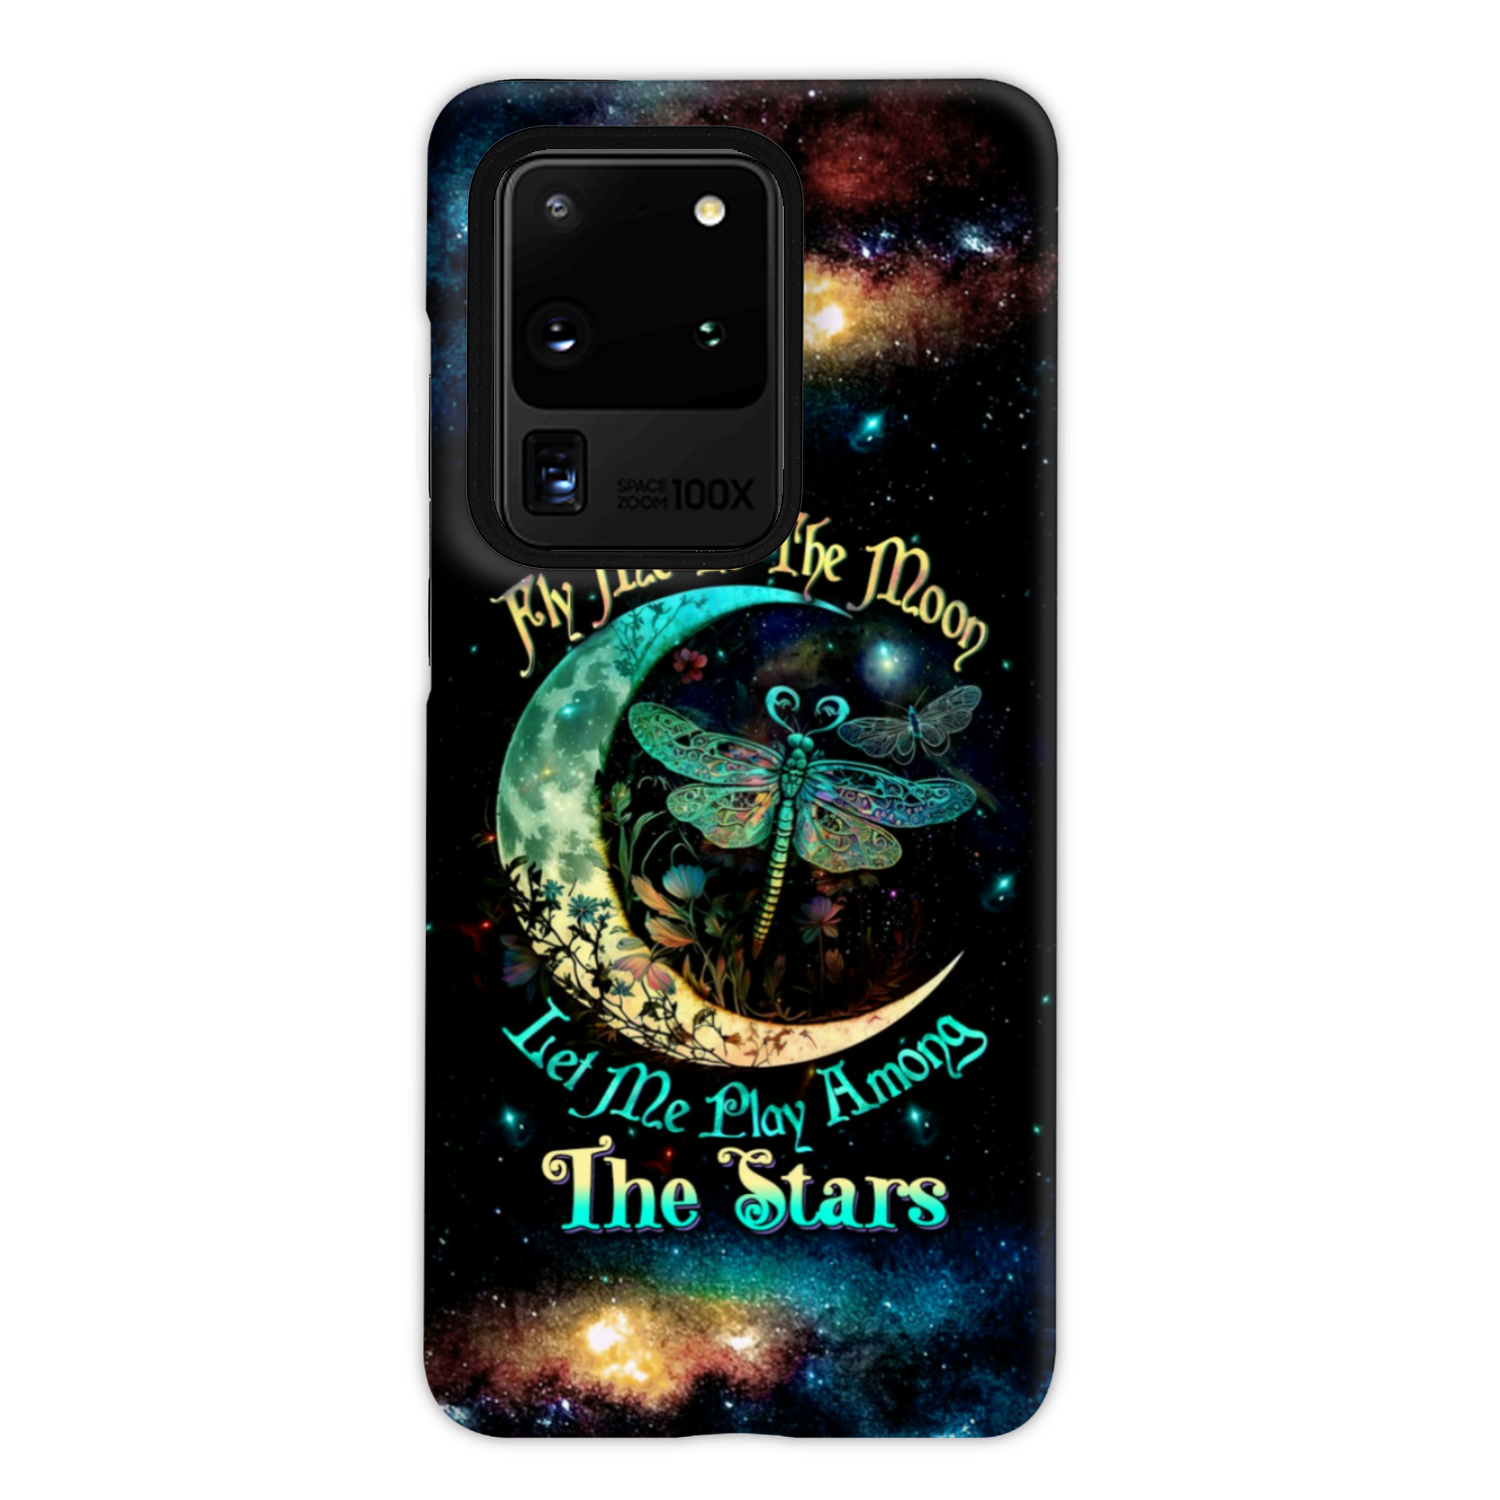 FLY ME TO THE MOON PHONE CASE - TLTW0304233